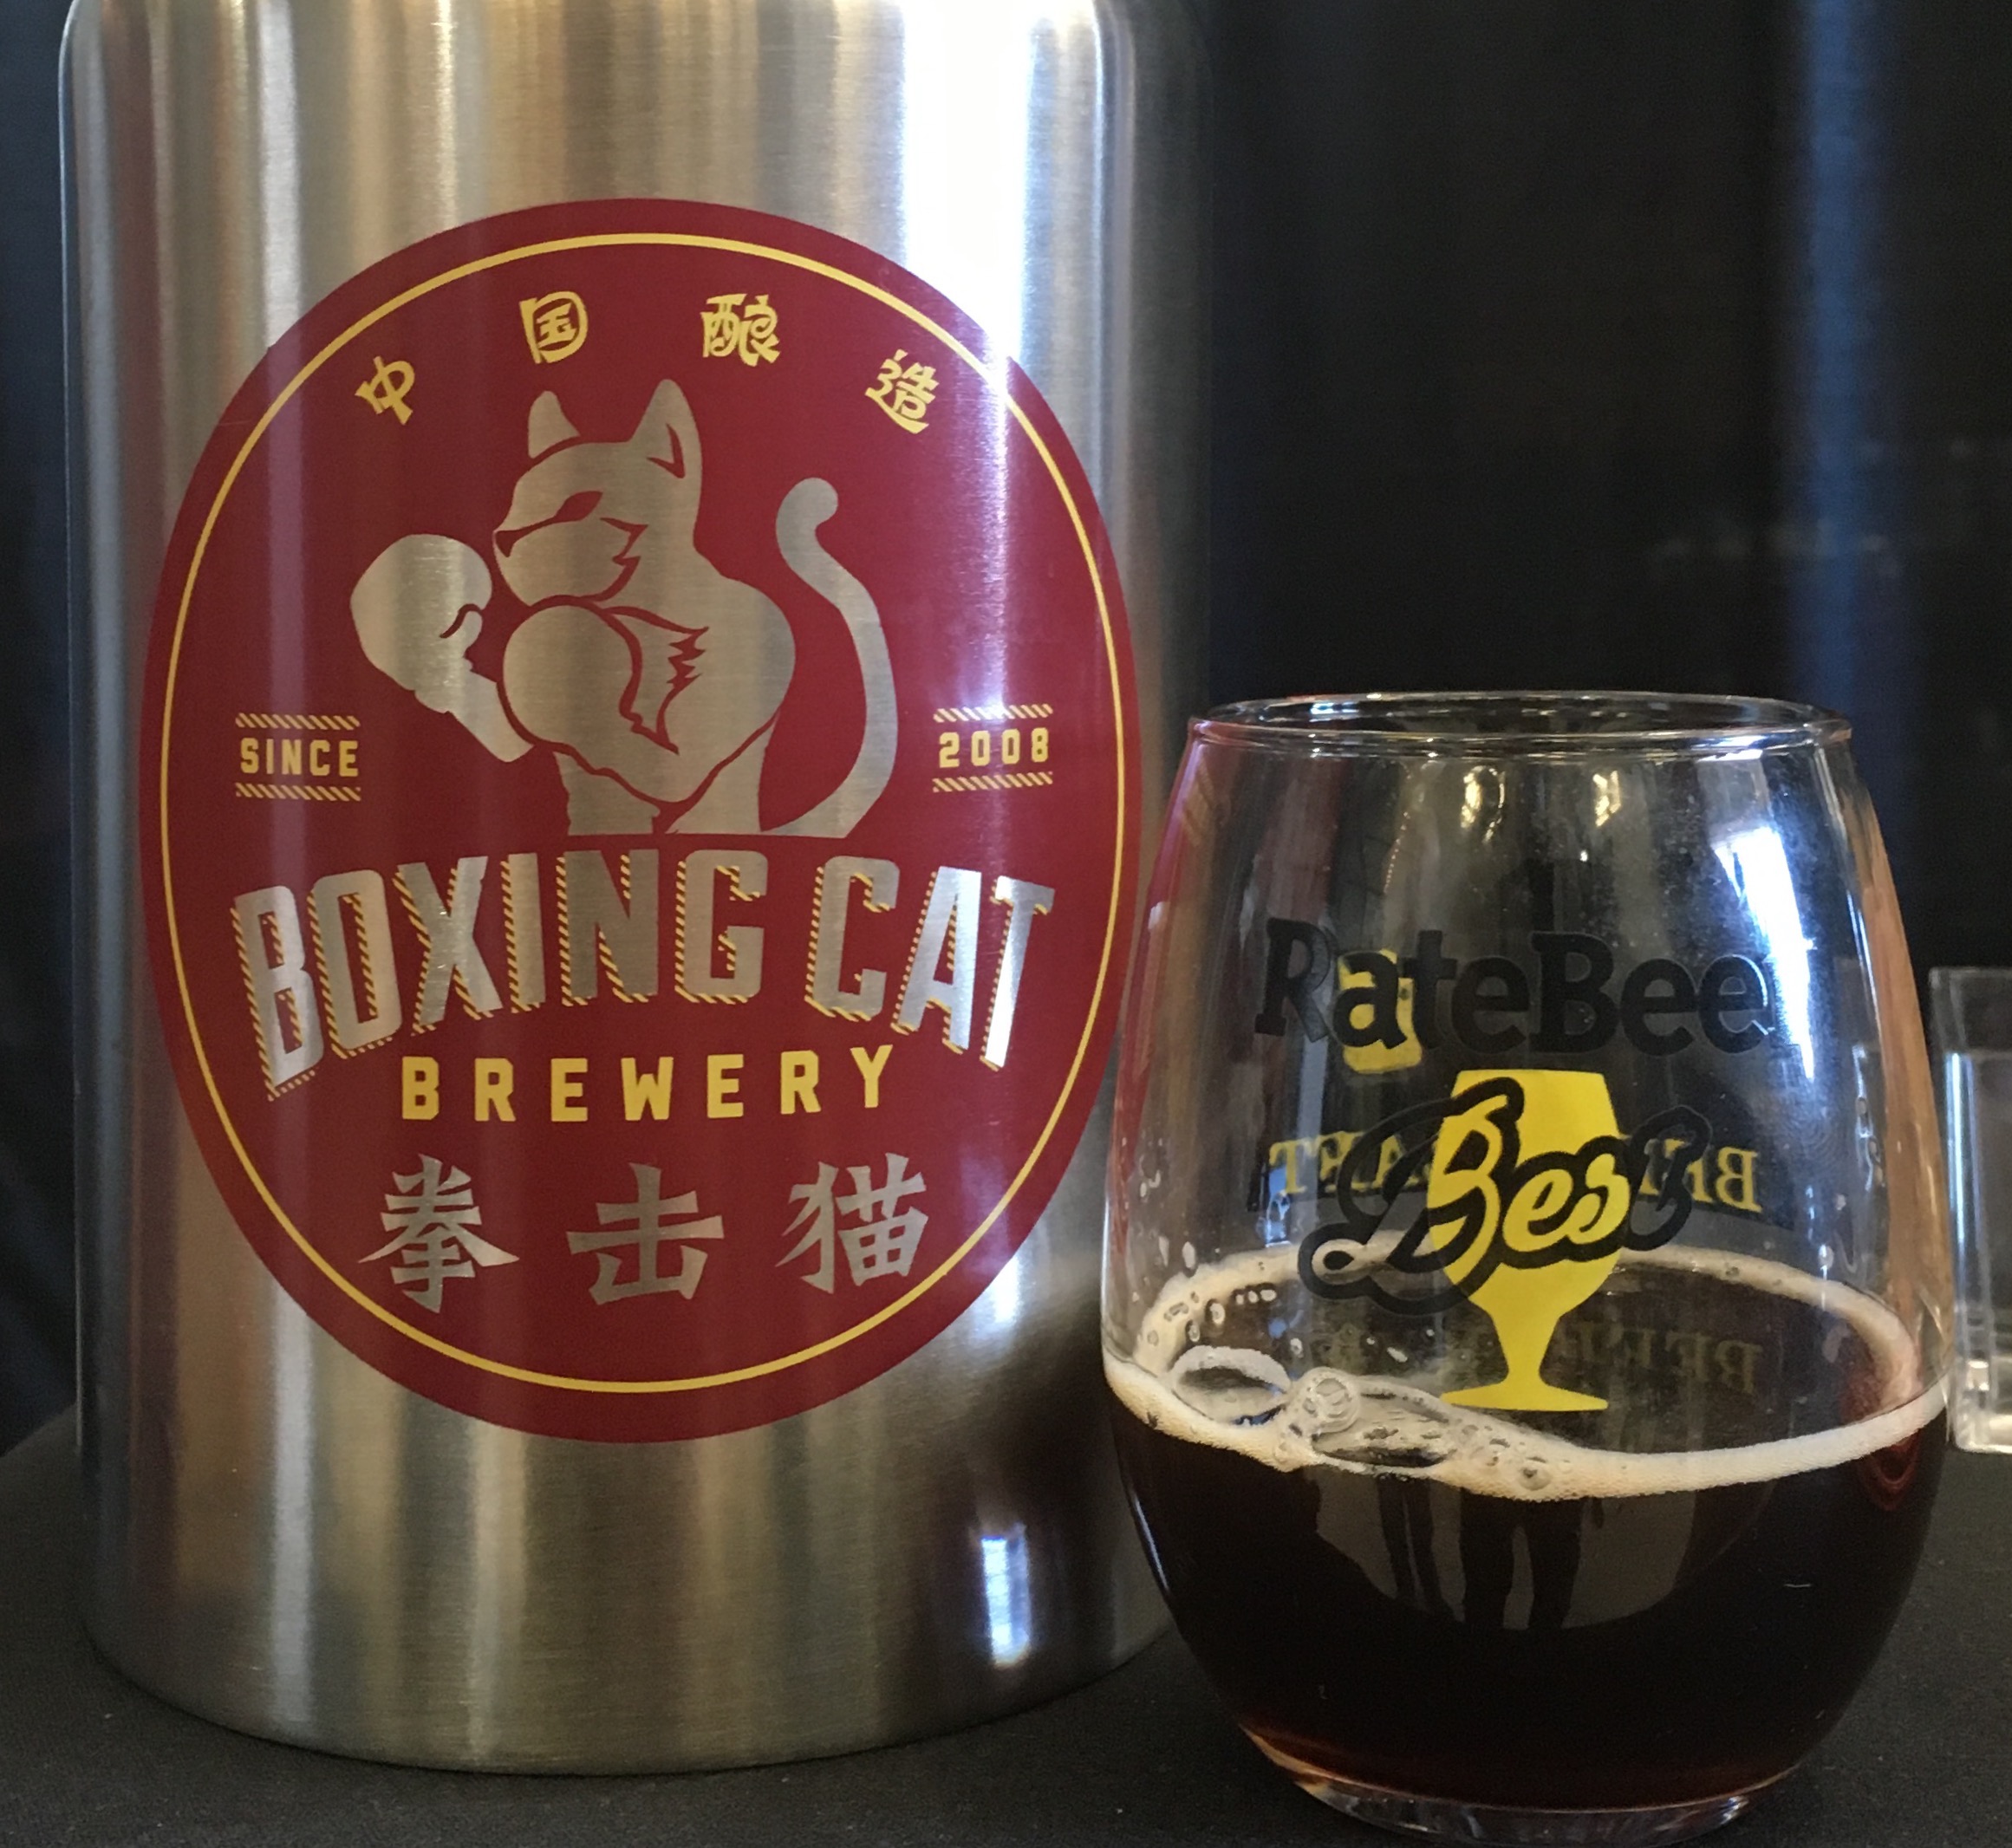 China's Boxing Cat Brewery at 2016 RateBeer Best Festival.